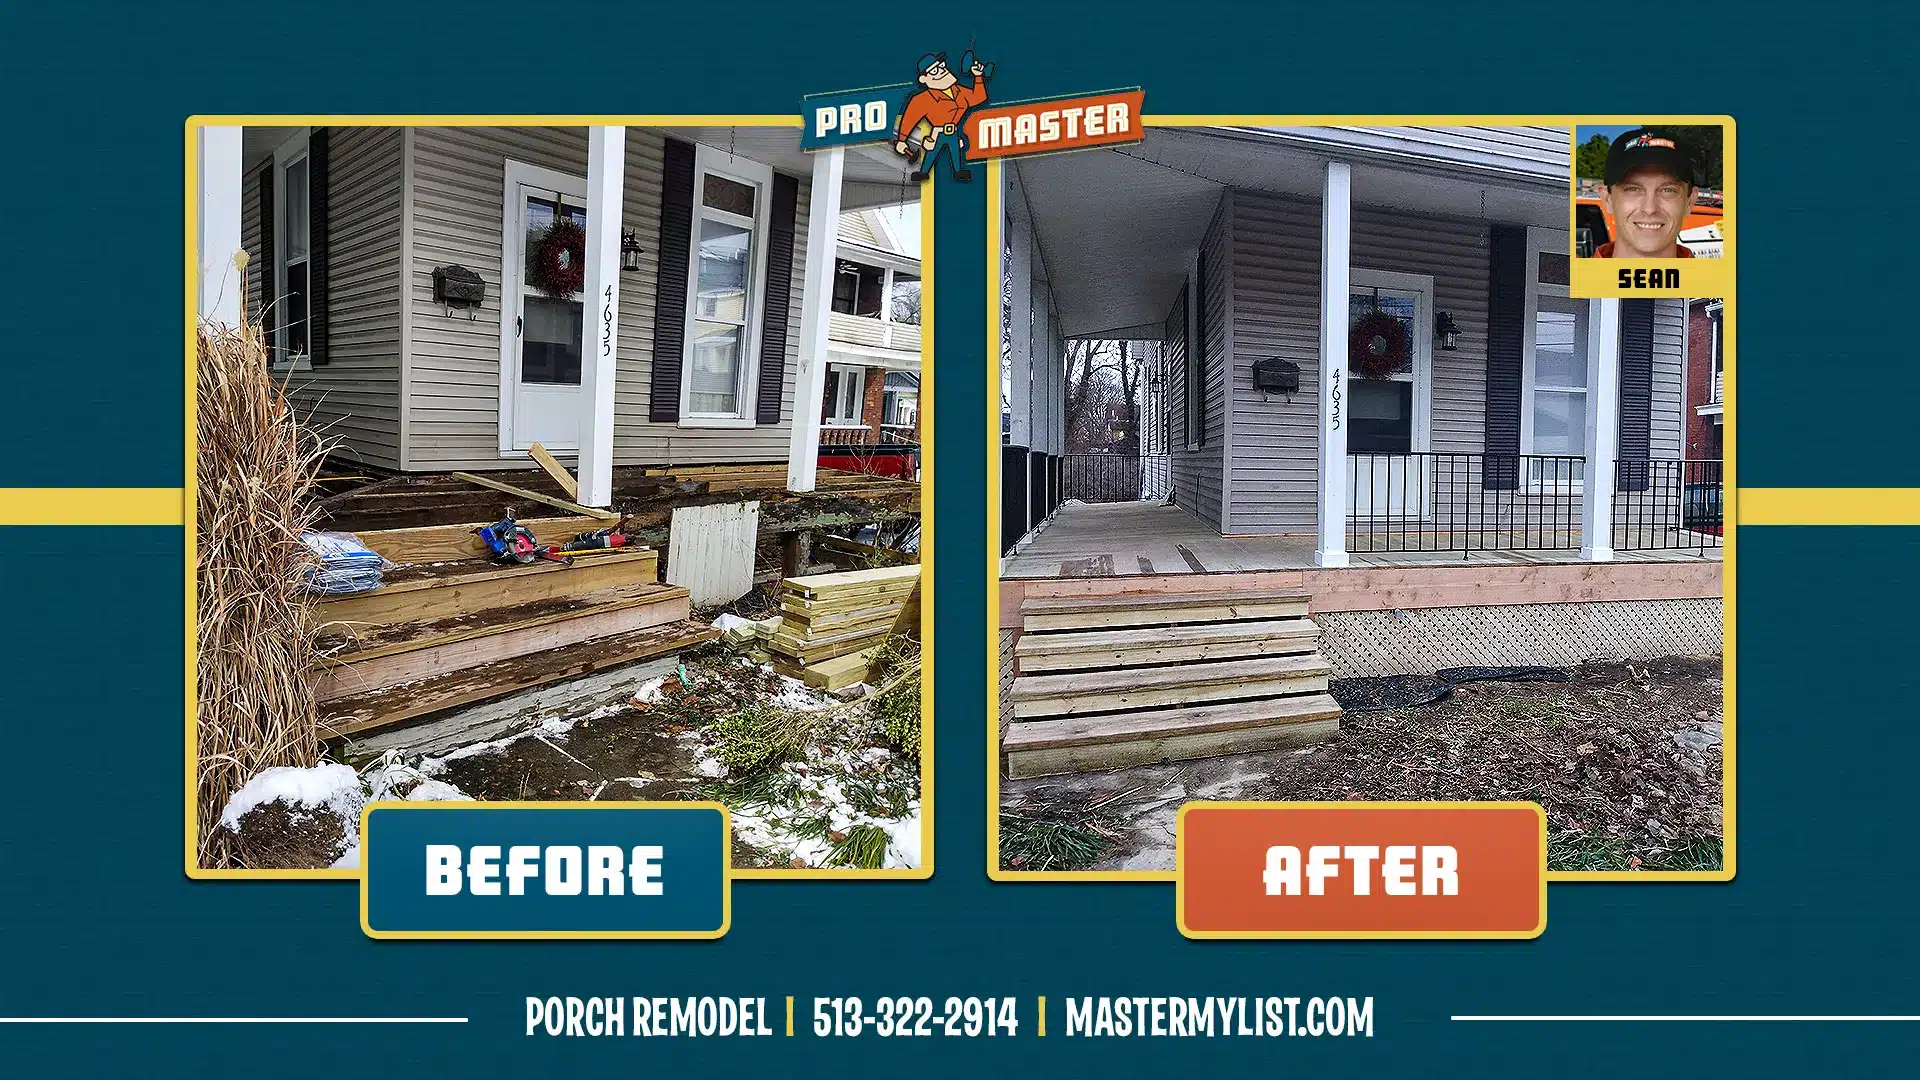 Before and after image of porch repair and remodel in Cincinnati, OH.